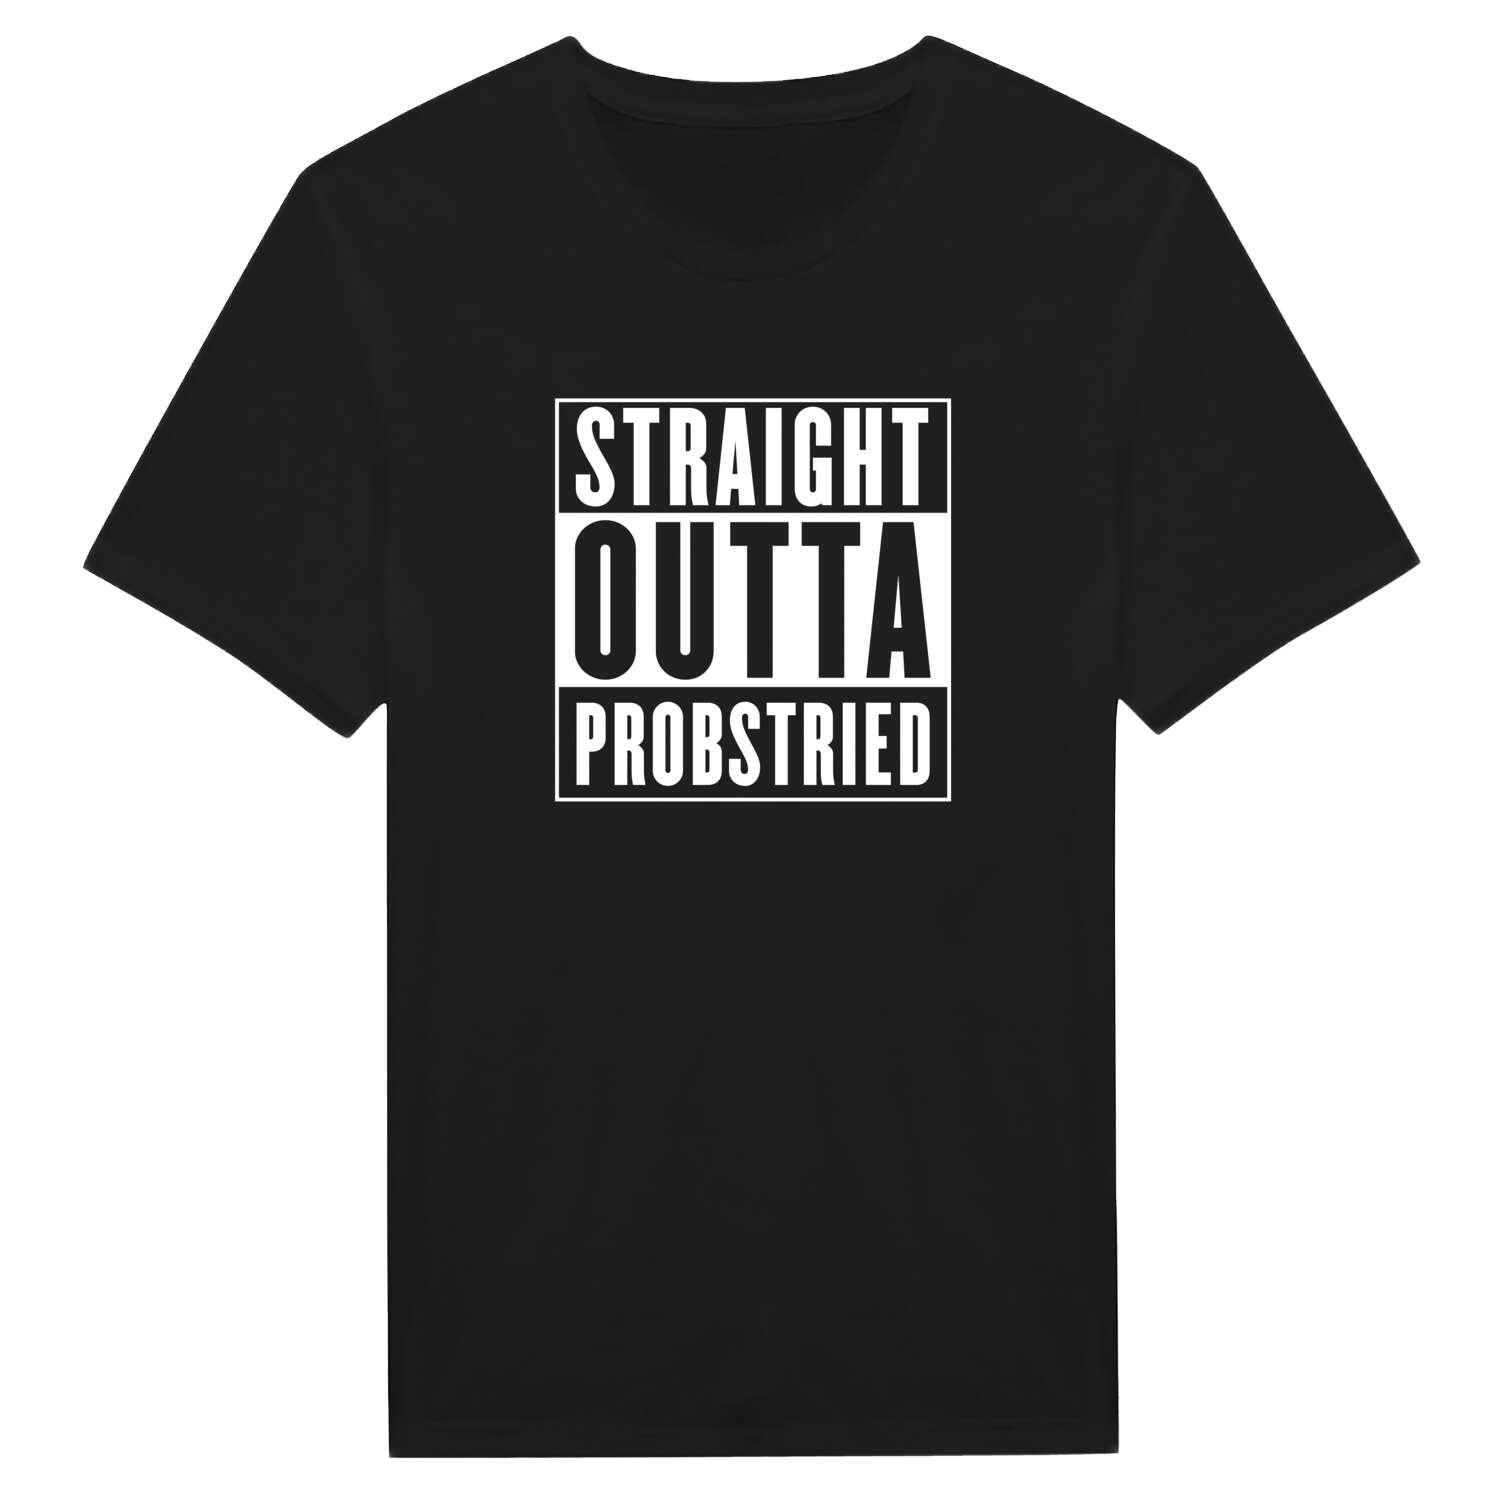 Probstried T-Shirt »Straight Outta«